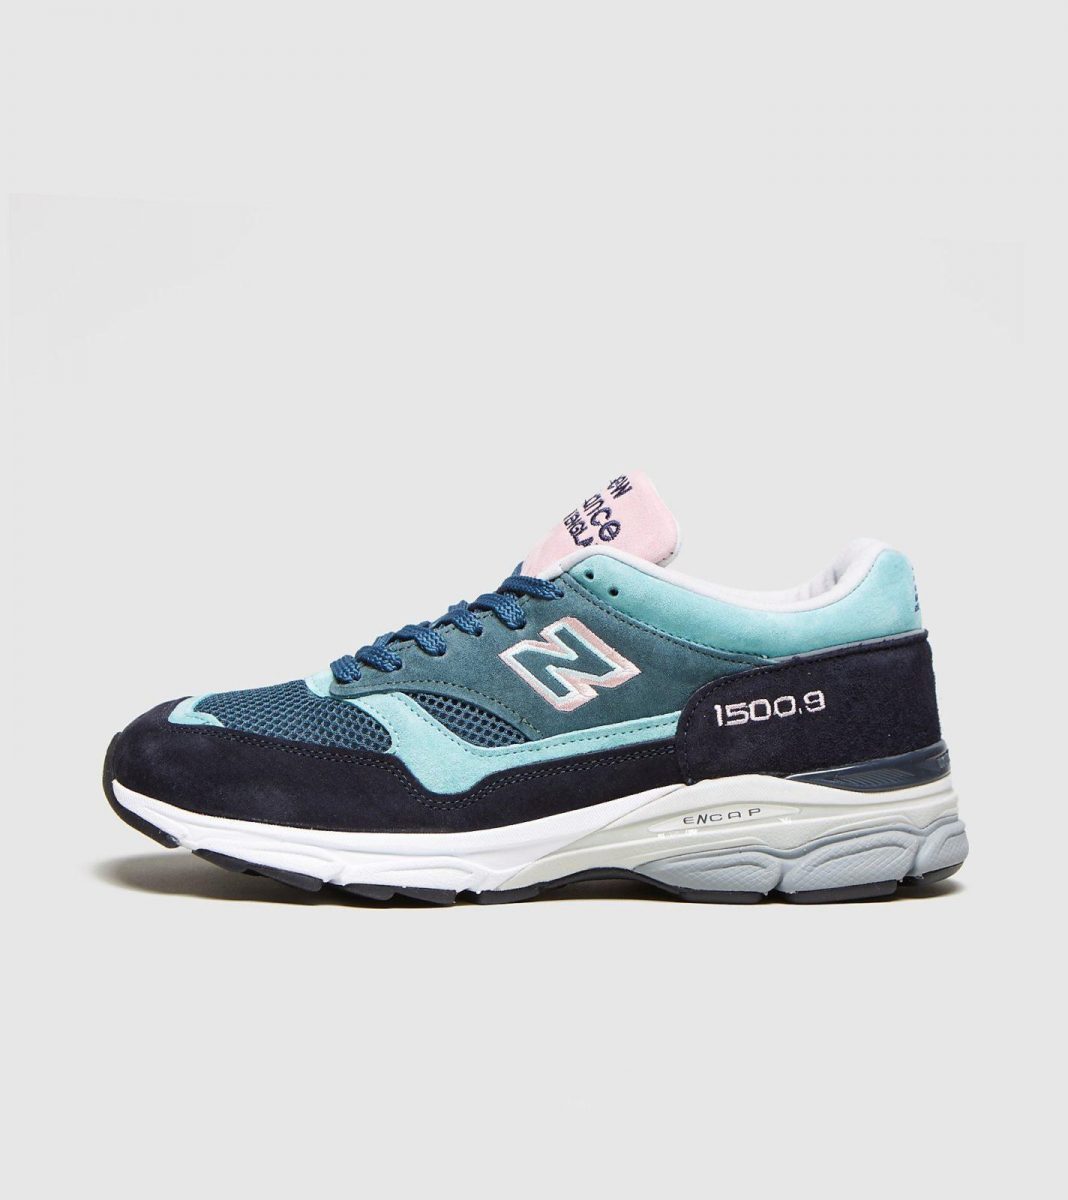 New Balance 15009 - Made in England (M15009FT) - SNEAKER SEARCH